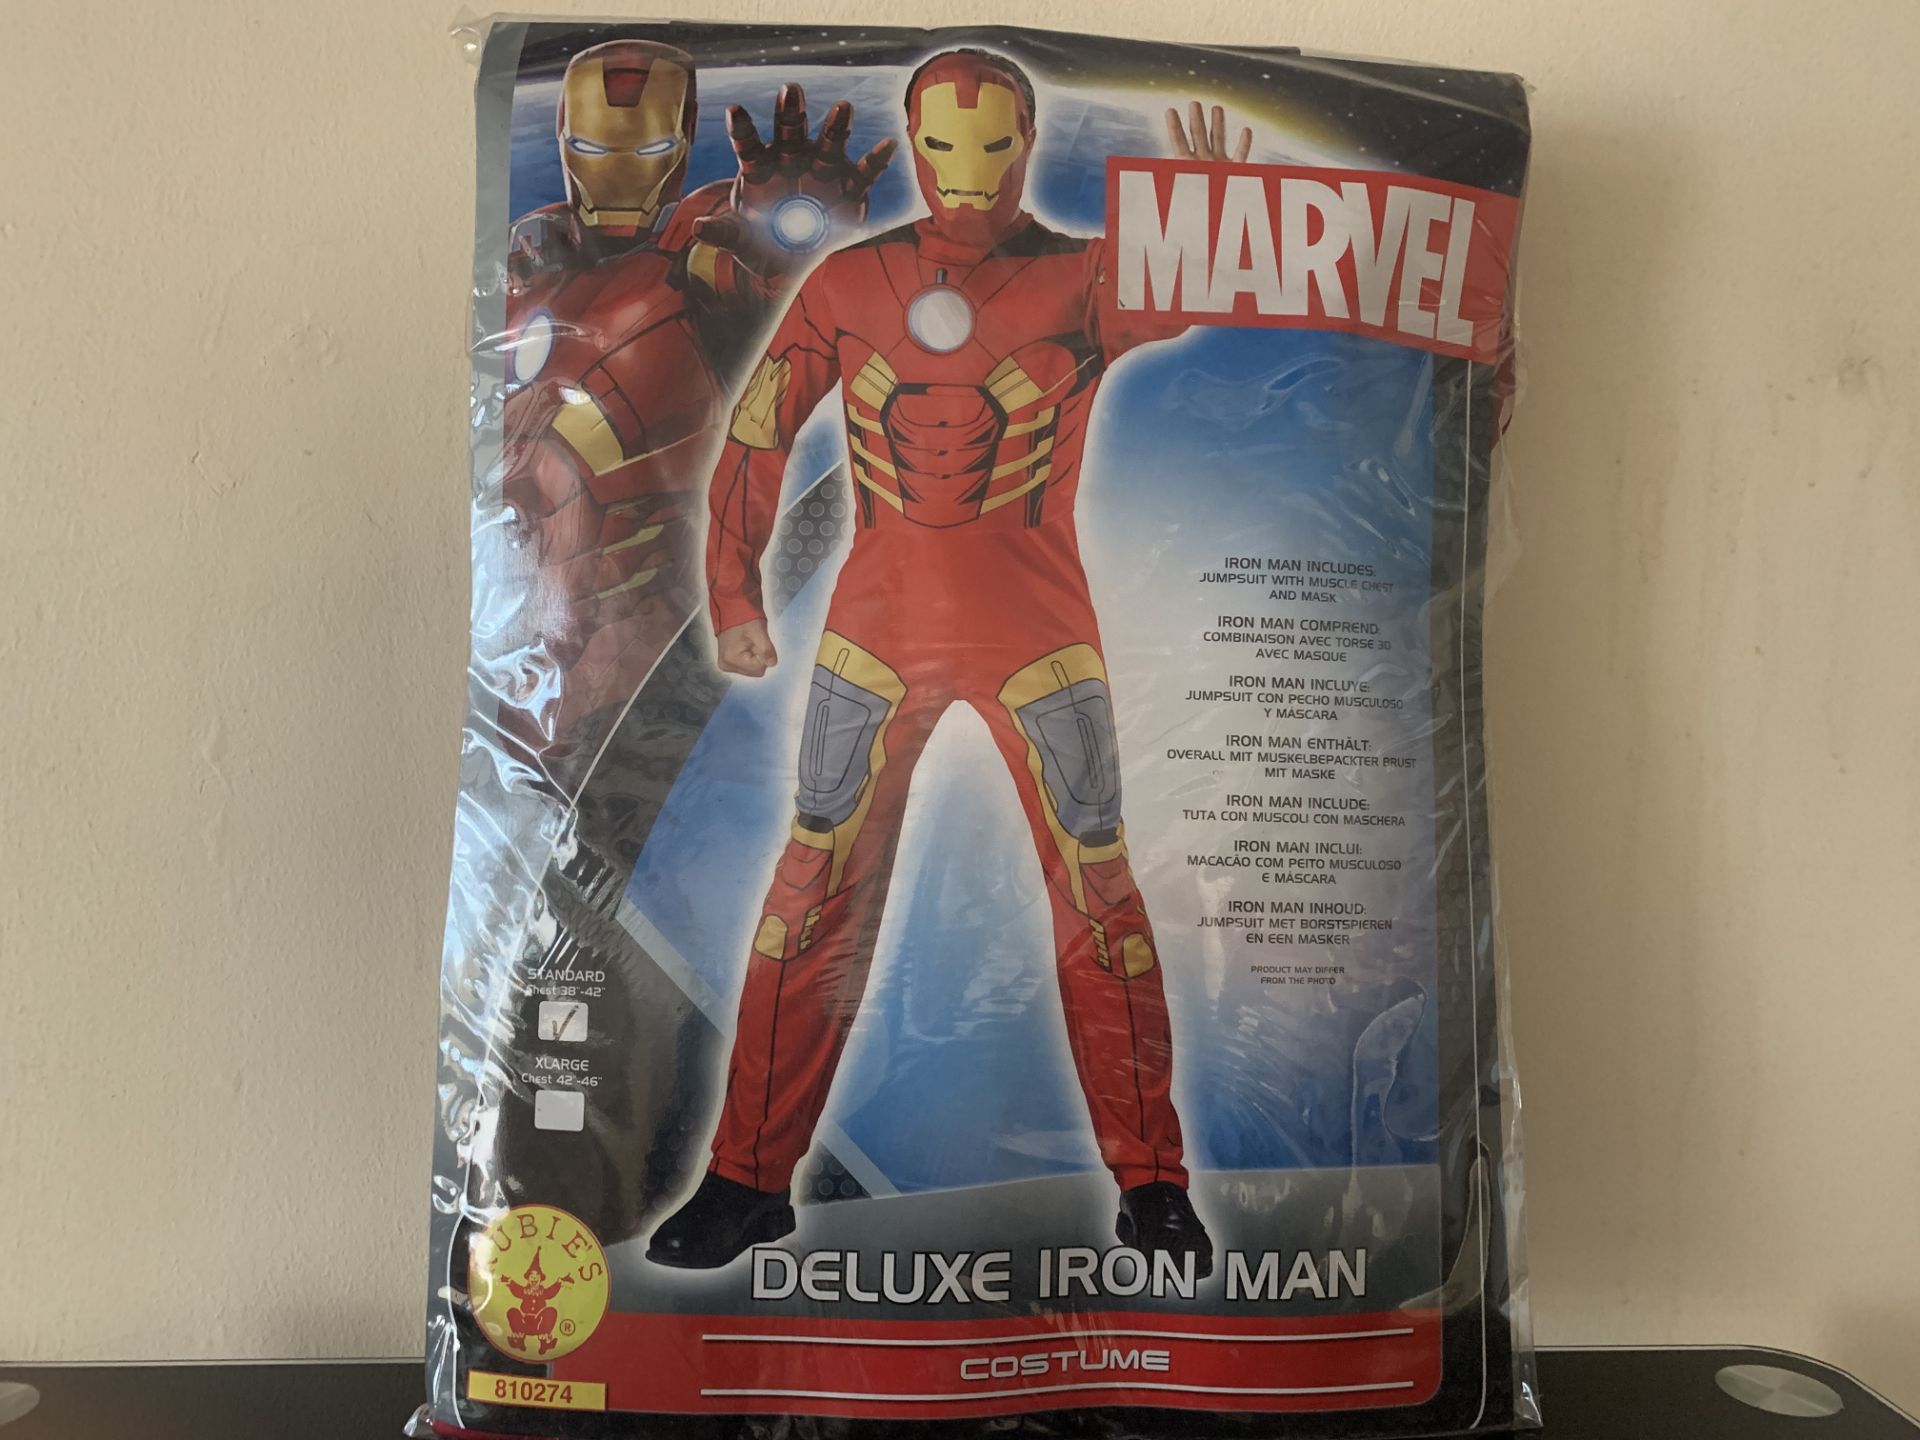 12 X BRAND NEW RUBIES MARVEL DELUXE IRONMAN COSTUMES CHEST SIZE 38-42